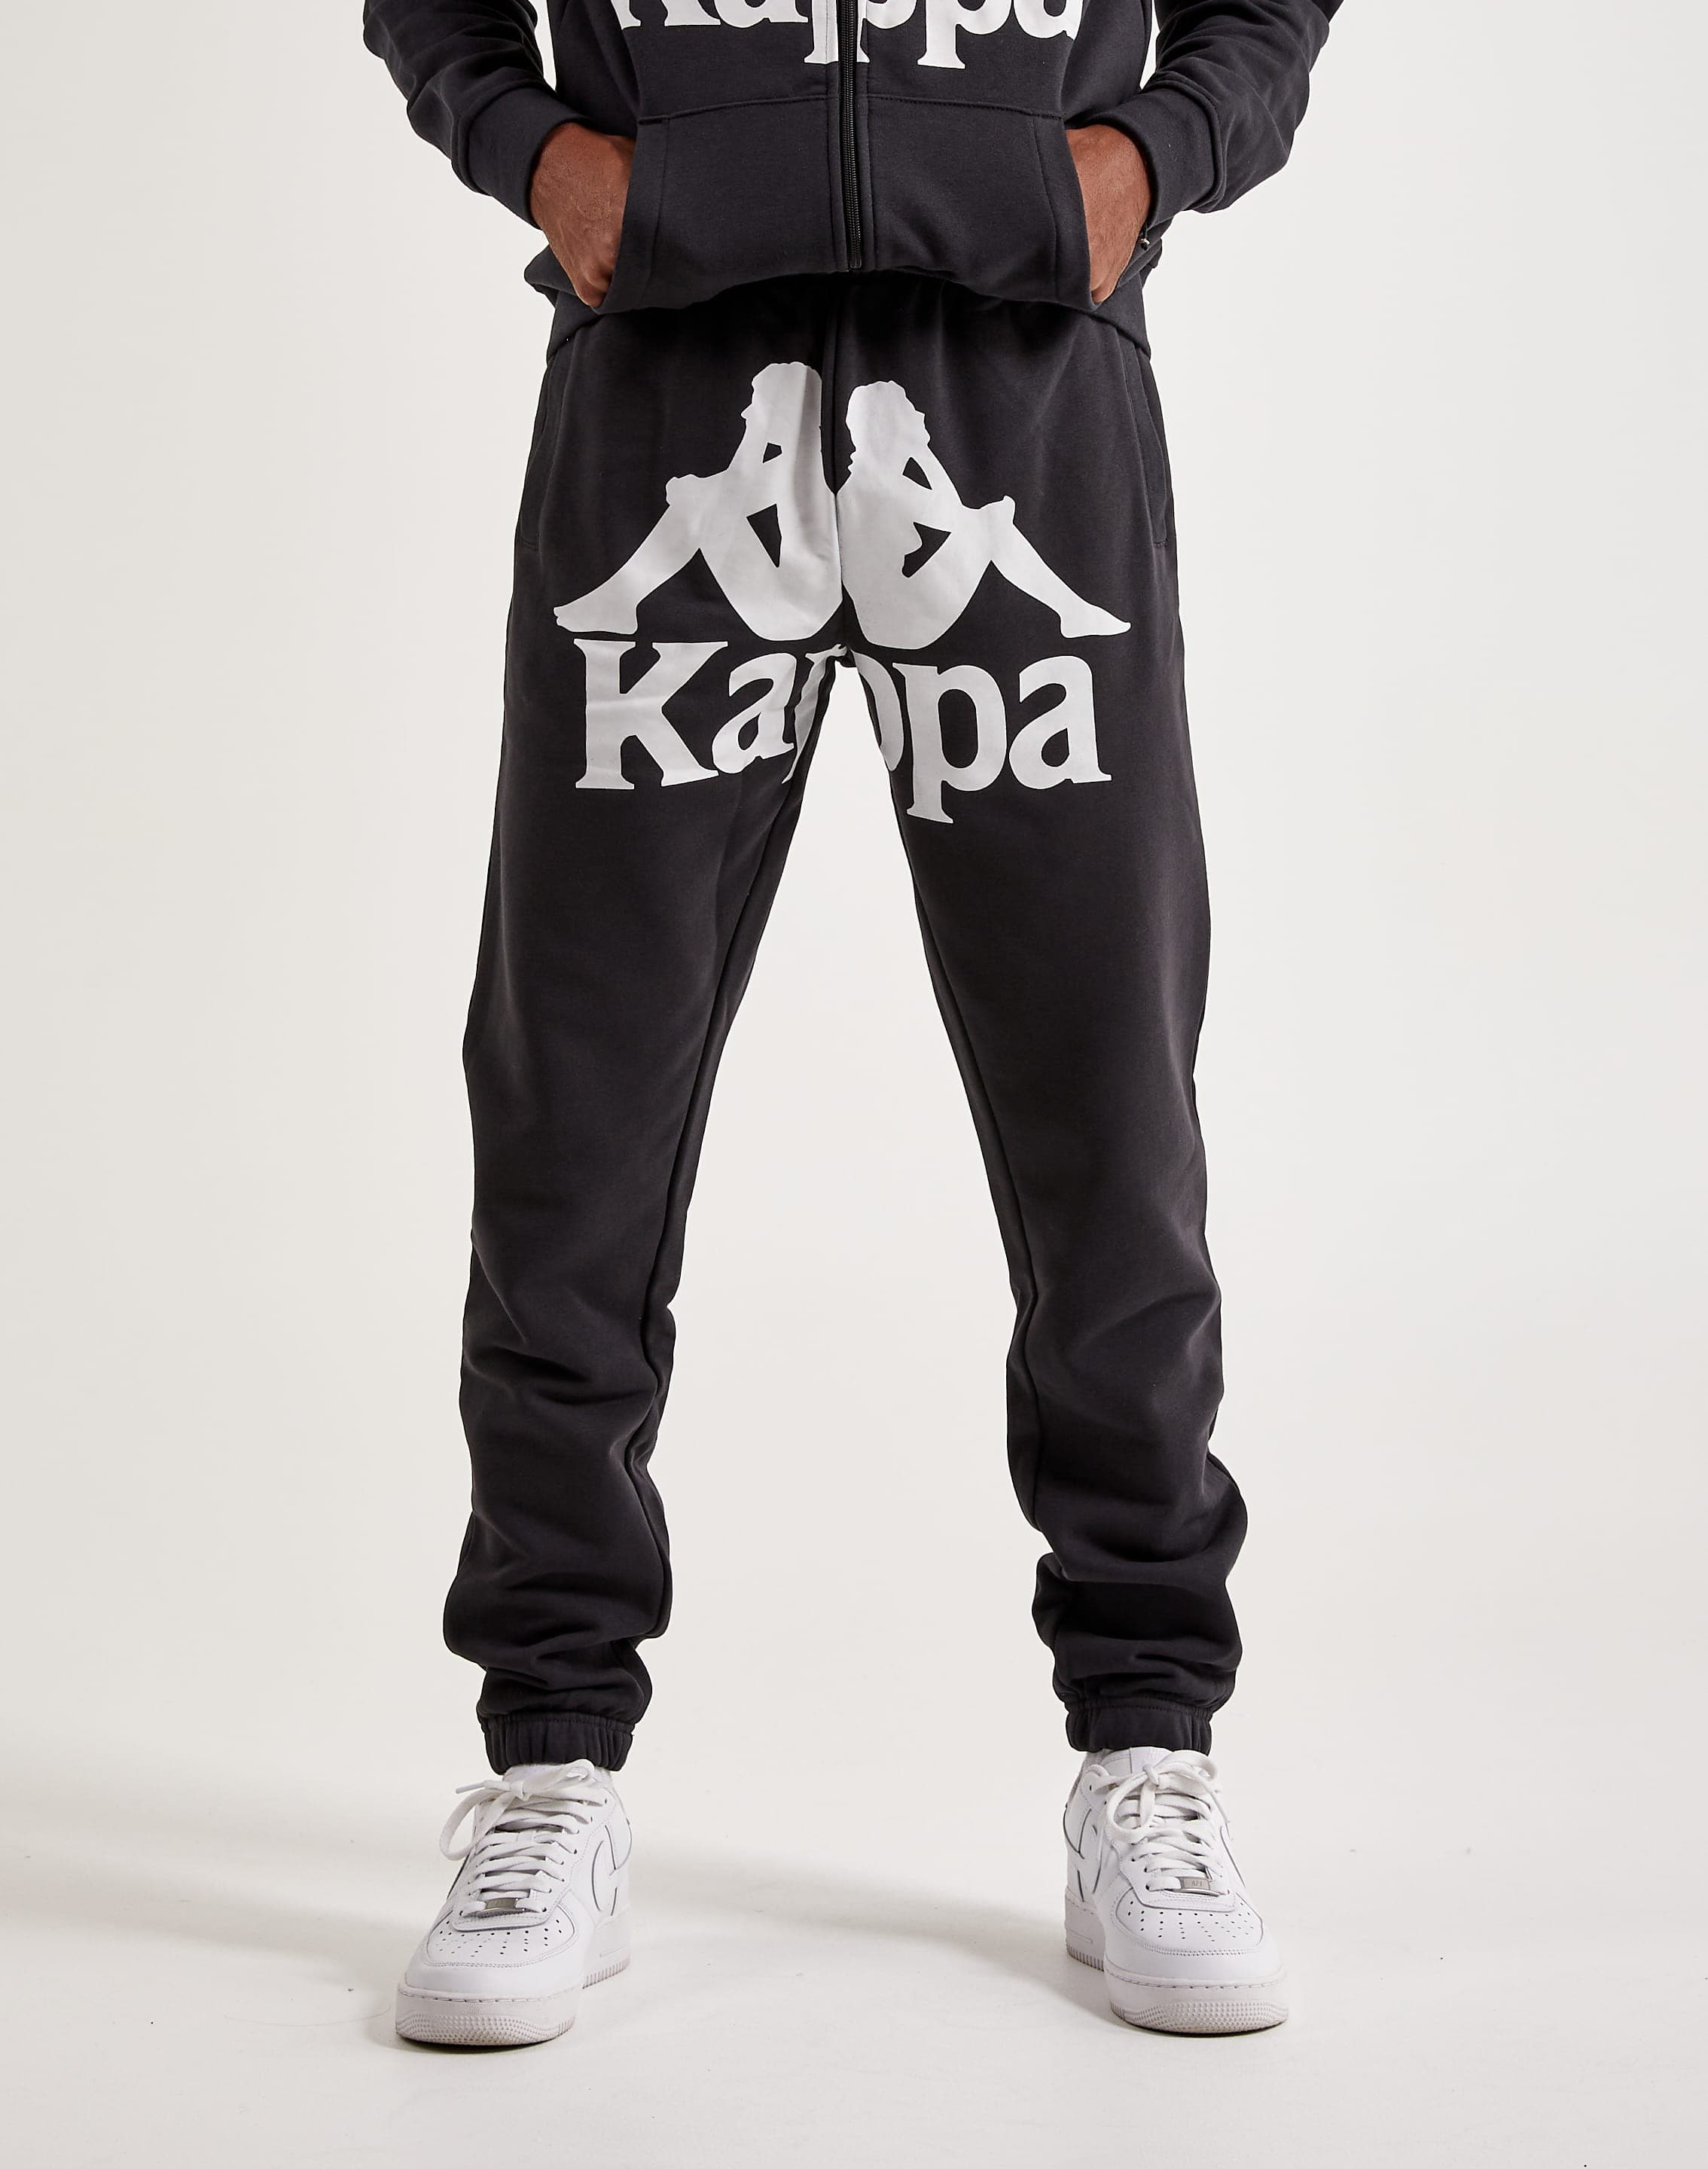 Kappa Authentic Anvest – DTLR